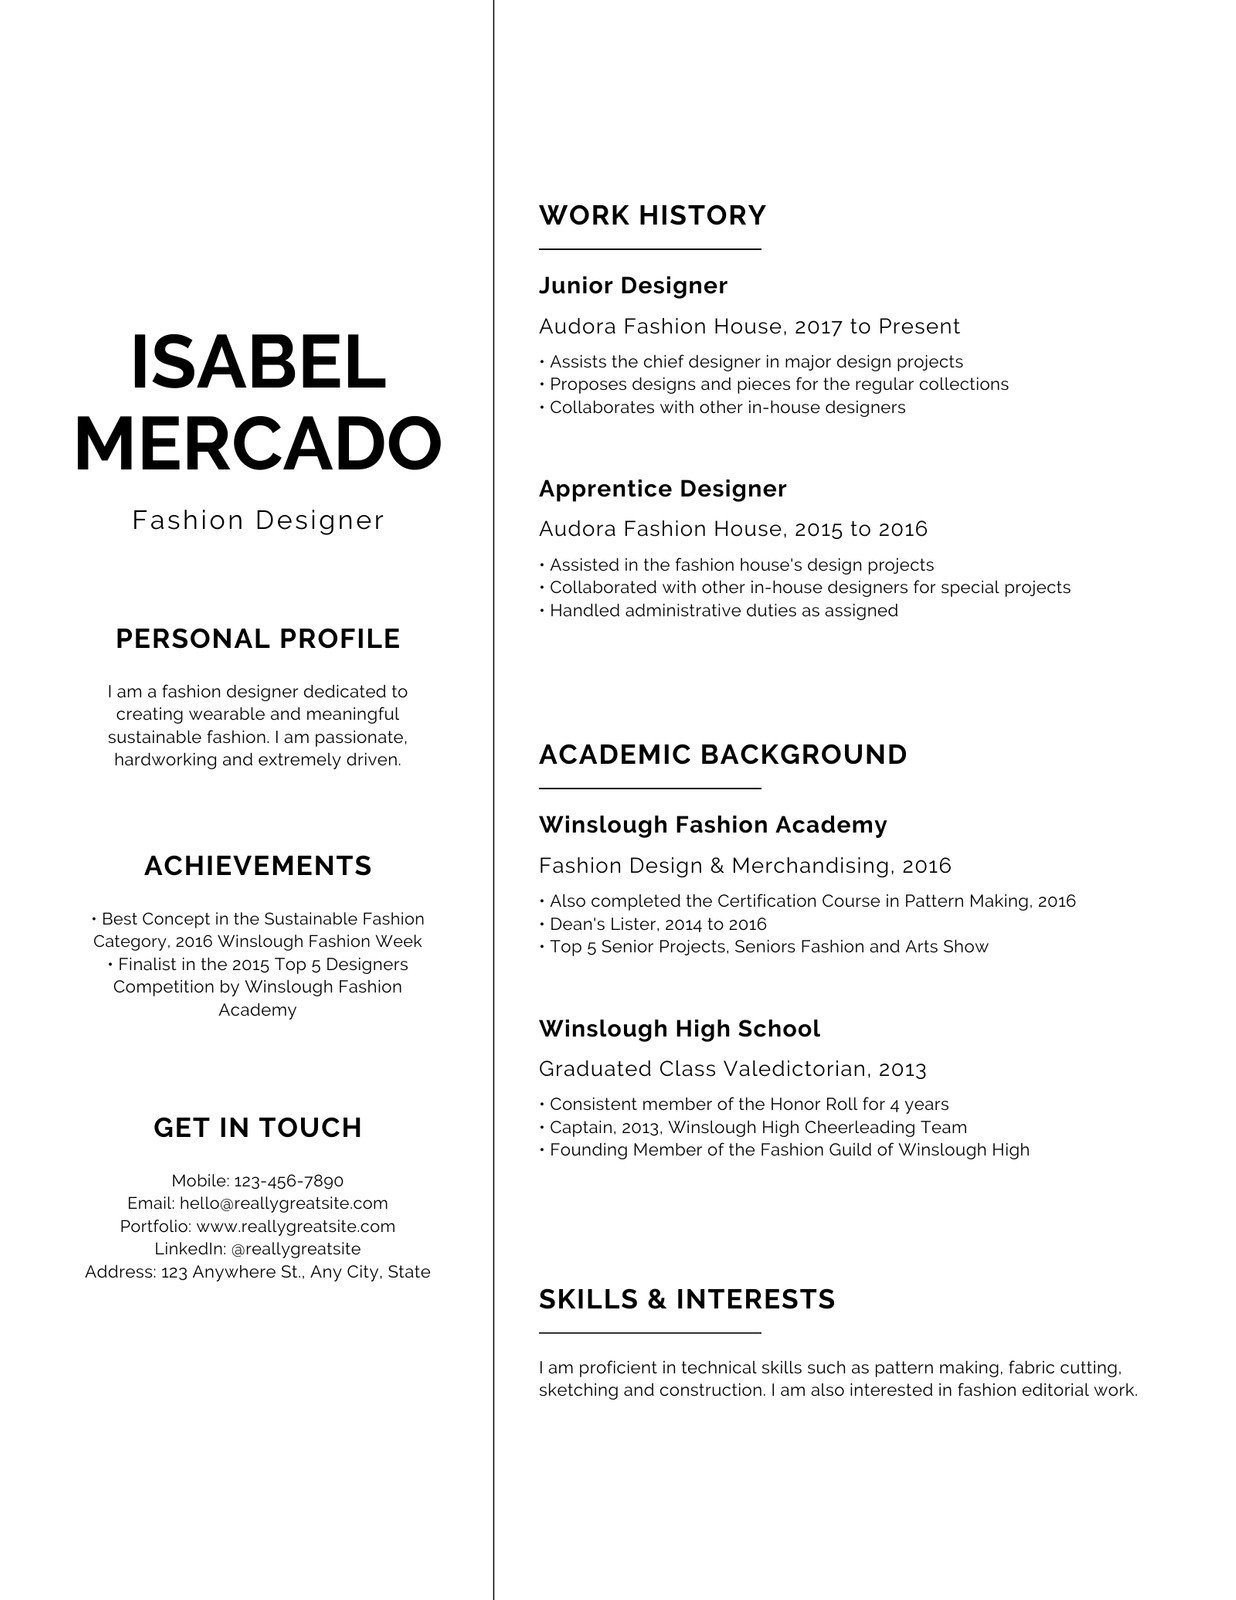 Here Is What You Should Do For Your Resume